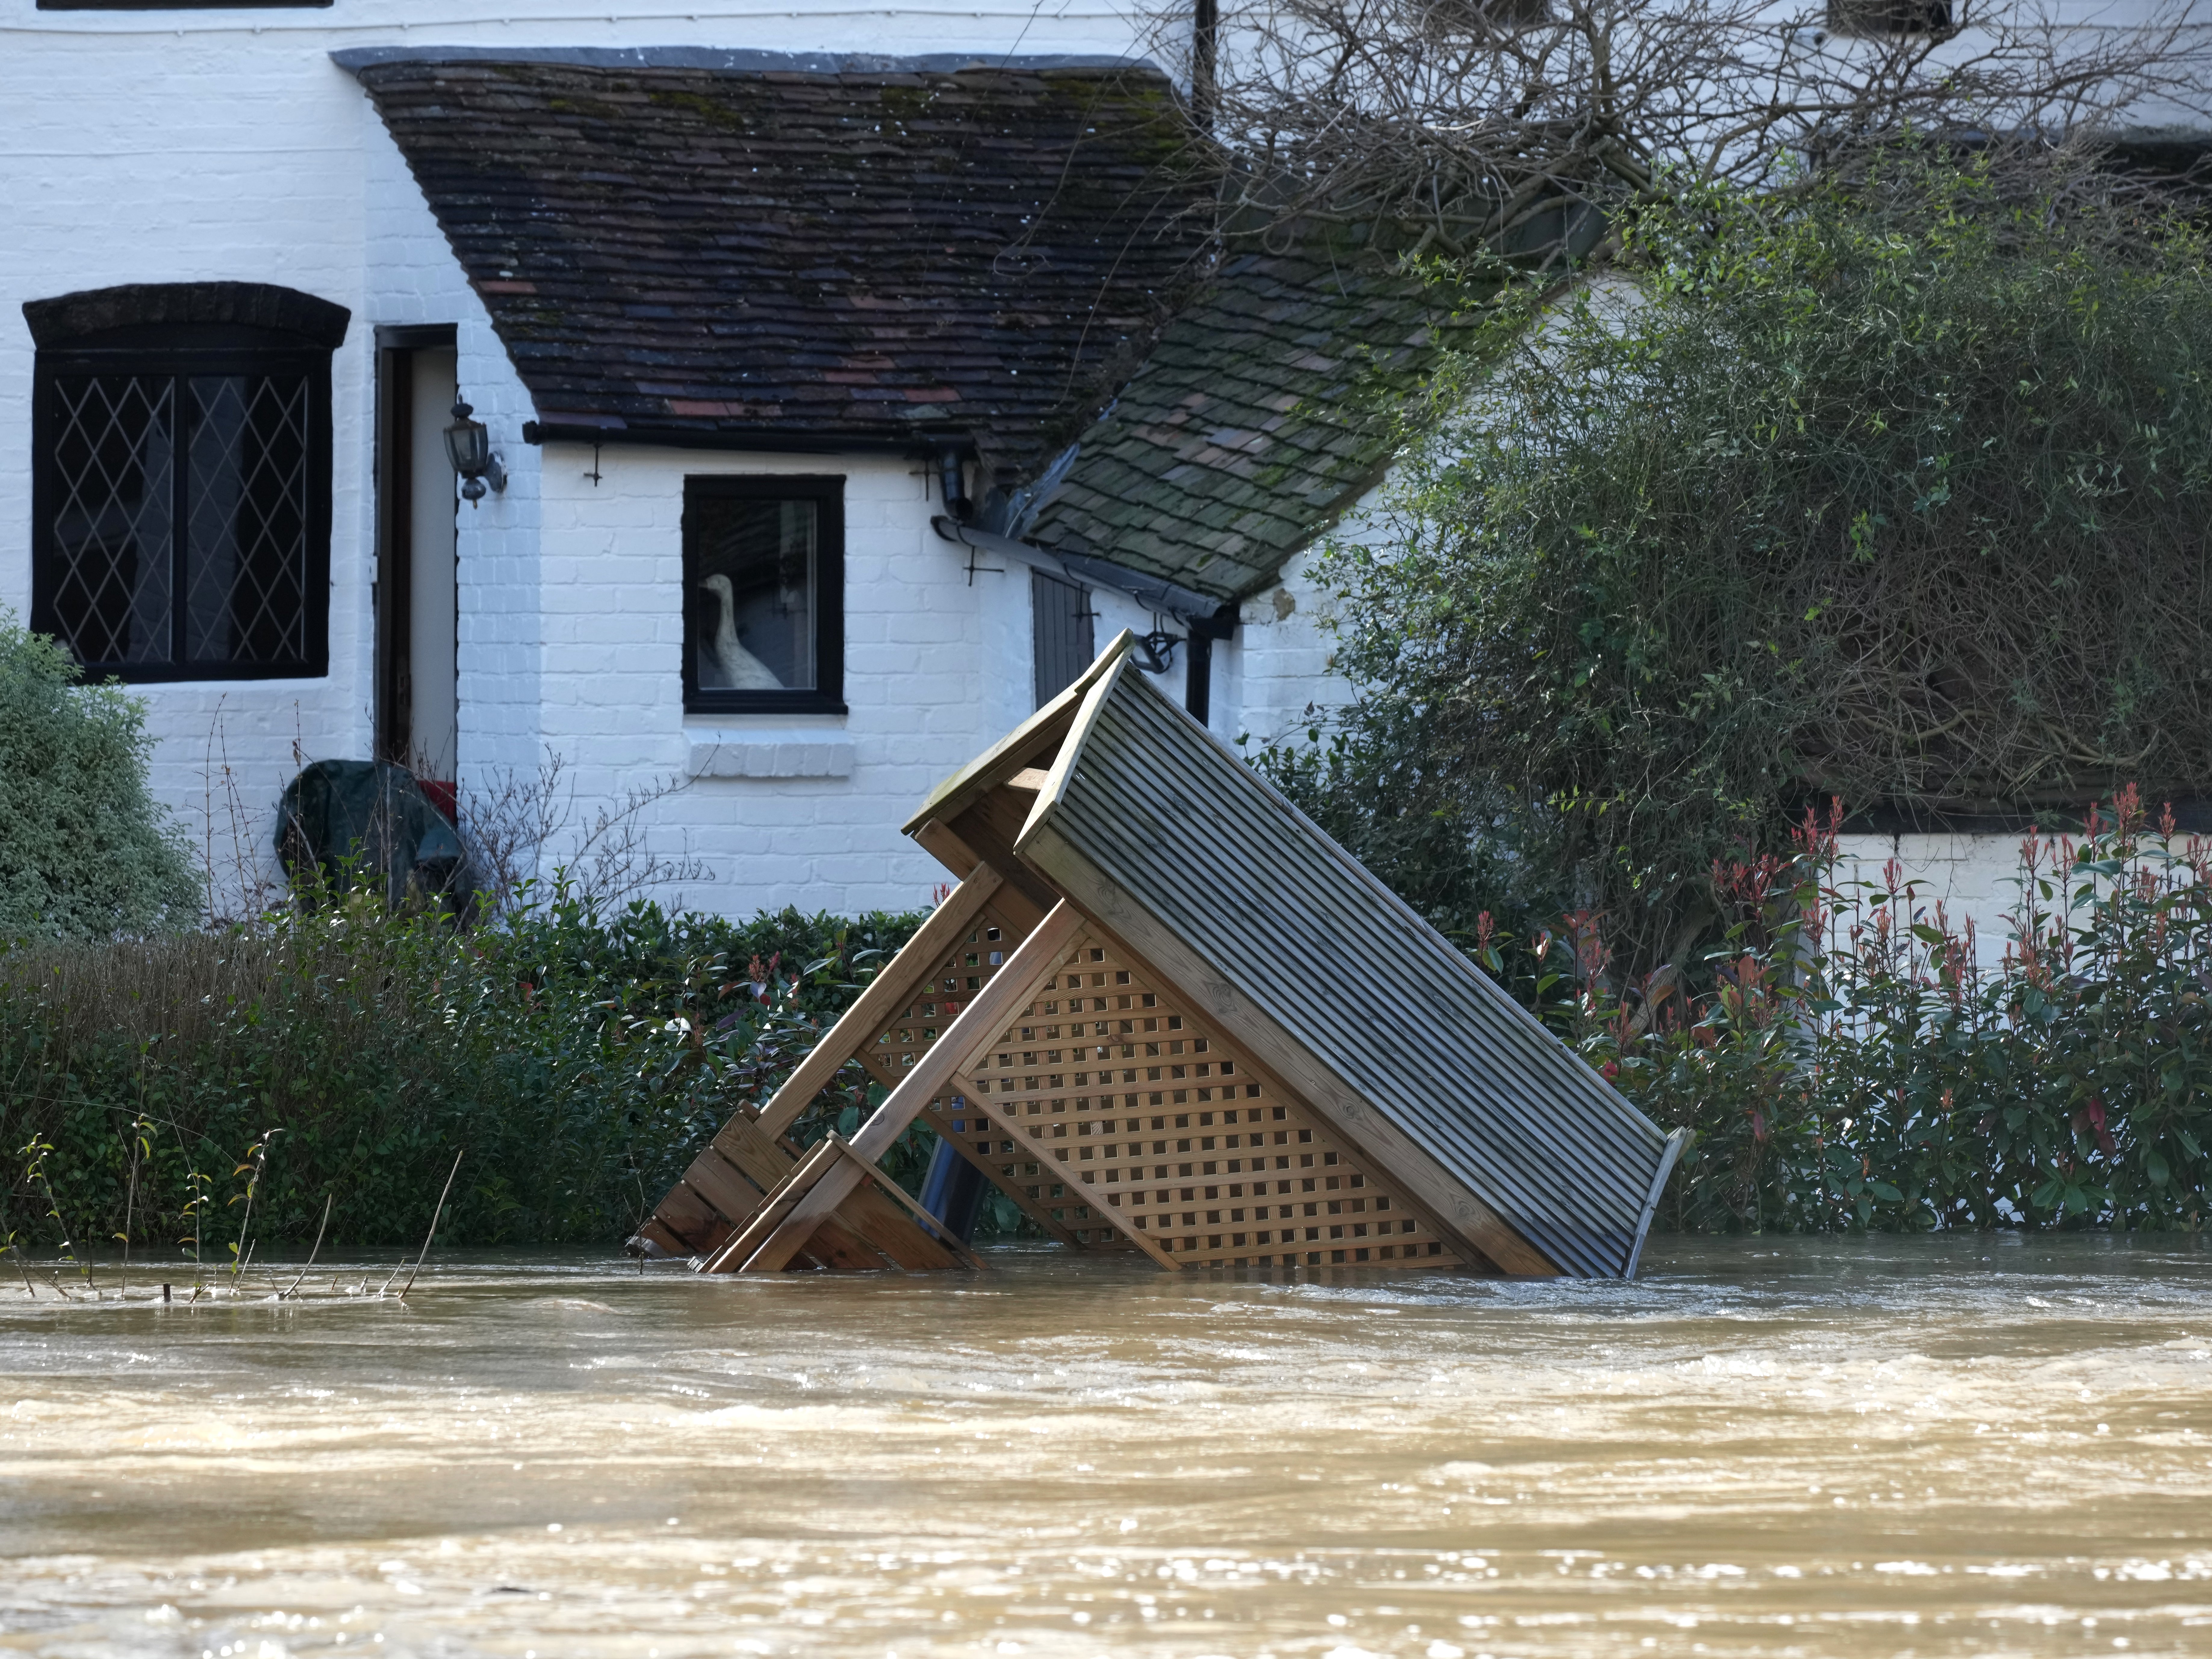 Homes surrounded by flood water from the River Severn after successive storms